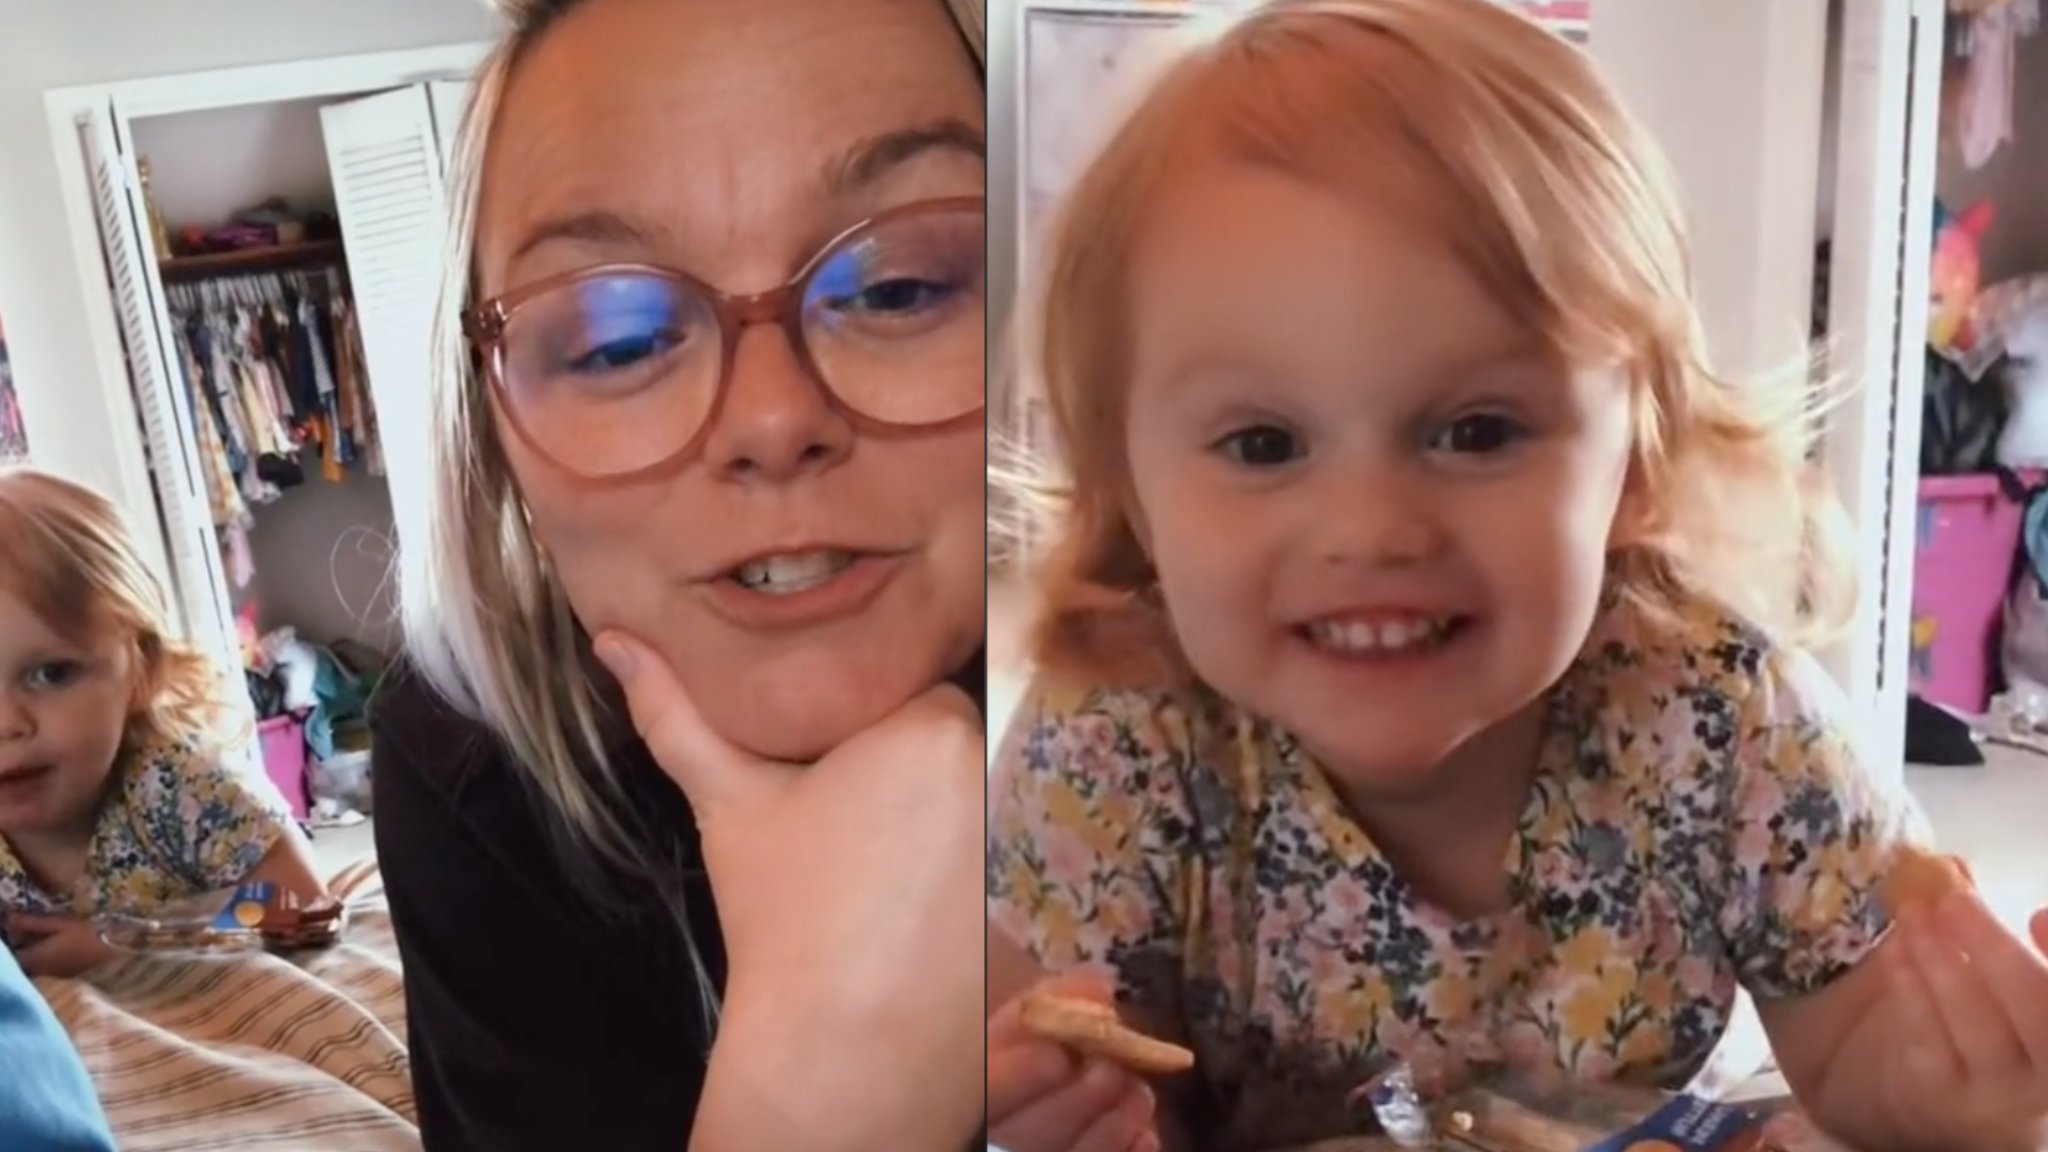 Mom Tries Weird 'Banana' Sleep Hack She Saw on TikTok & Is Shocked When It Actually Works